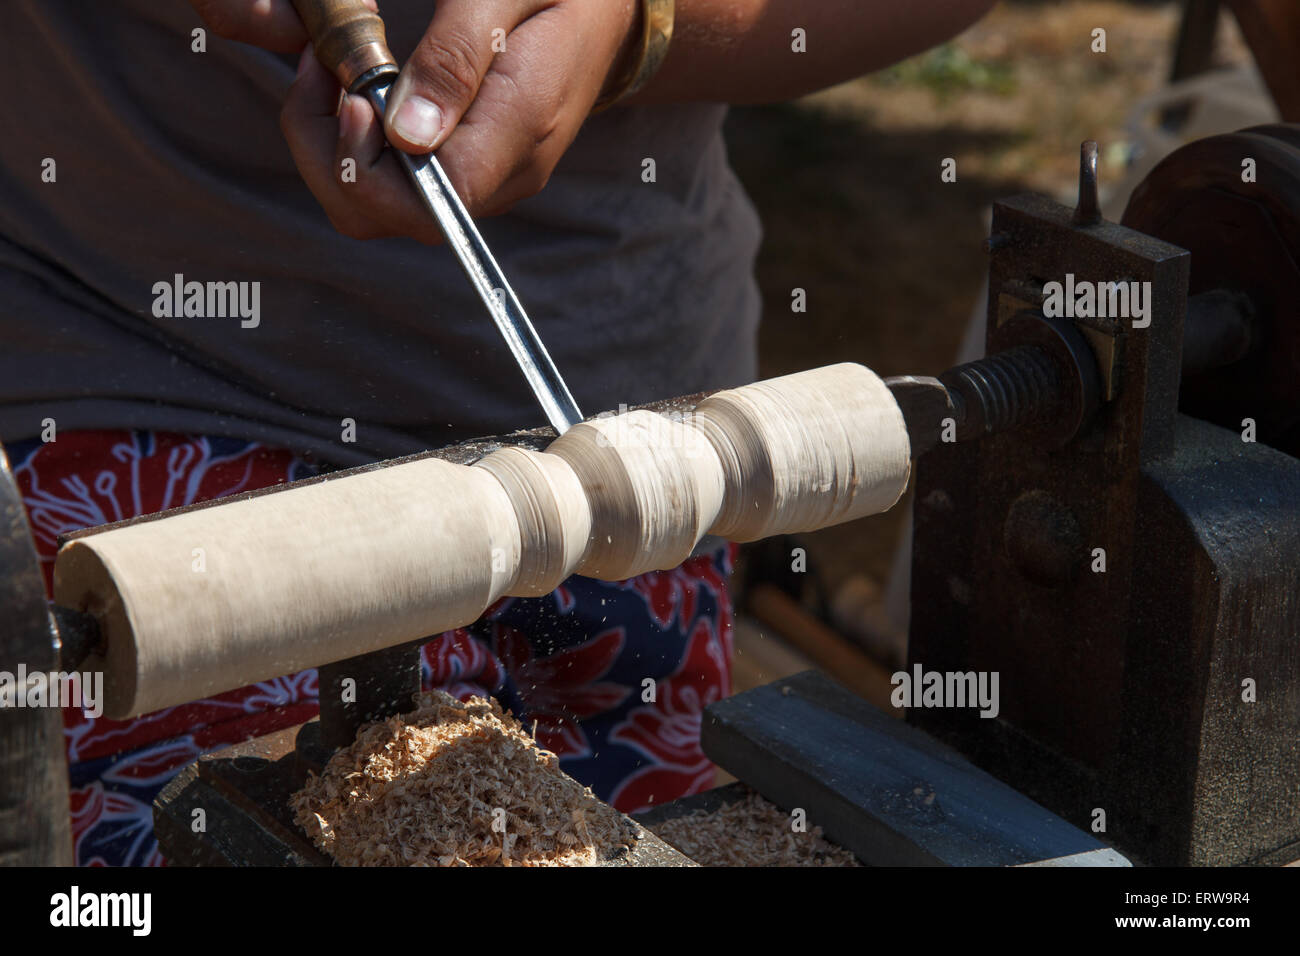 Working on a lathe Stock Photo